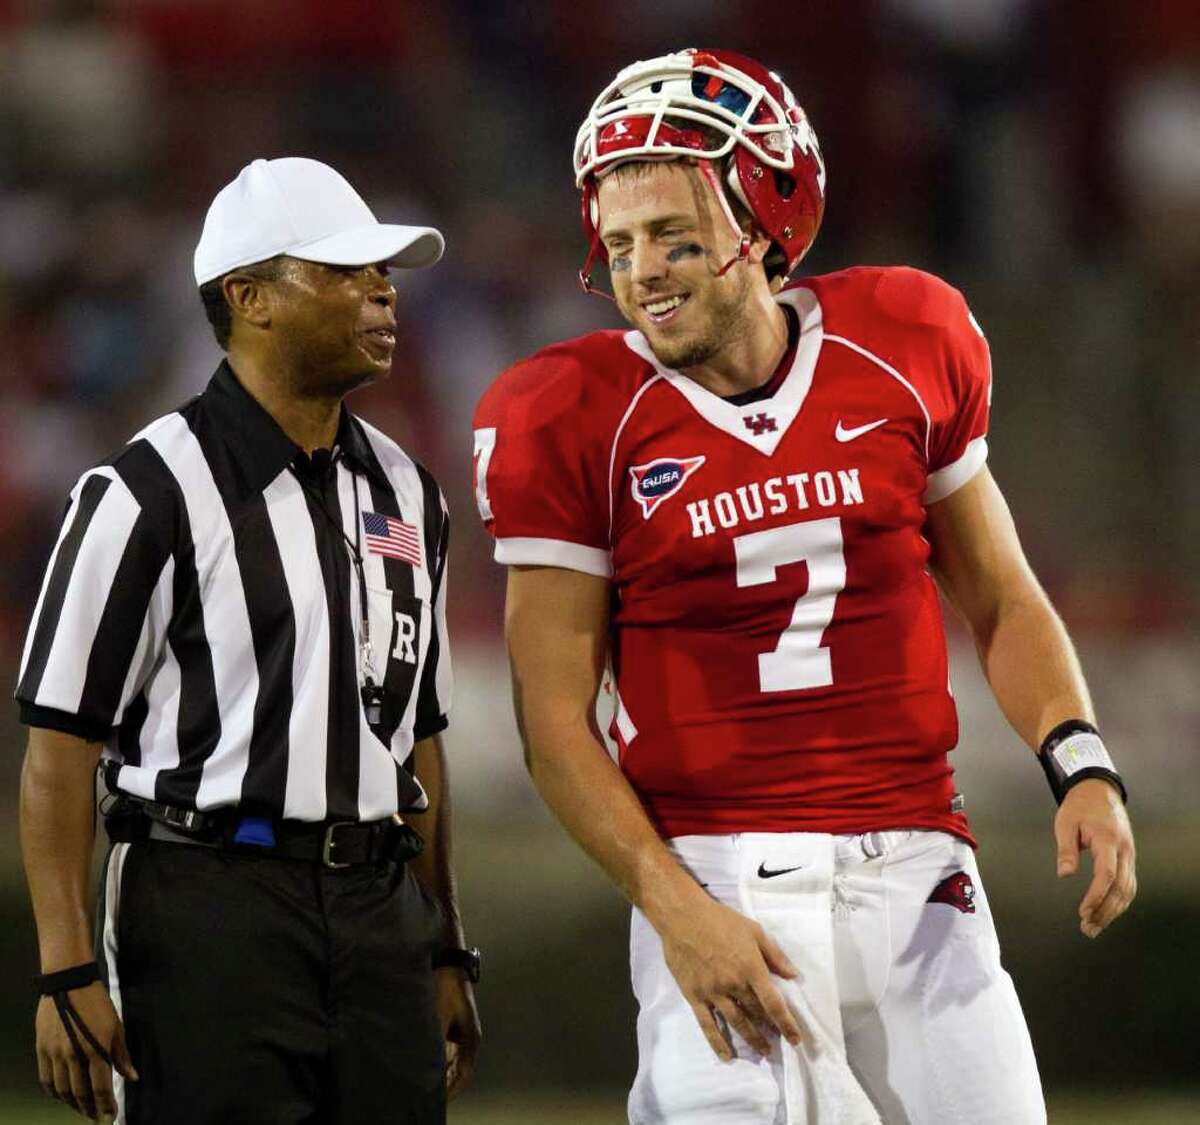 Houston Cougars quarterback Case Keenum (7) laughs with referee Jerry Banks during the first half of an NCAA football game against the Georgia State Panthers at Robertson Stadium, Saturday, Sept. 24, 2011, in Houston.